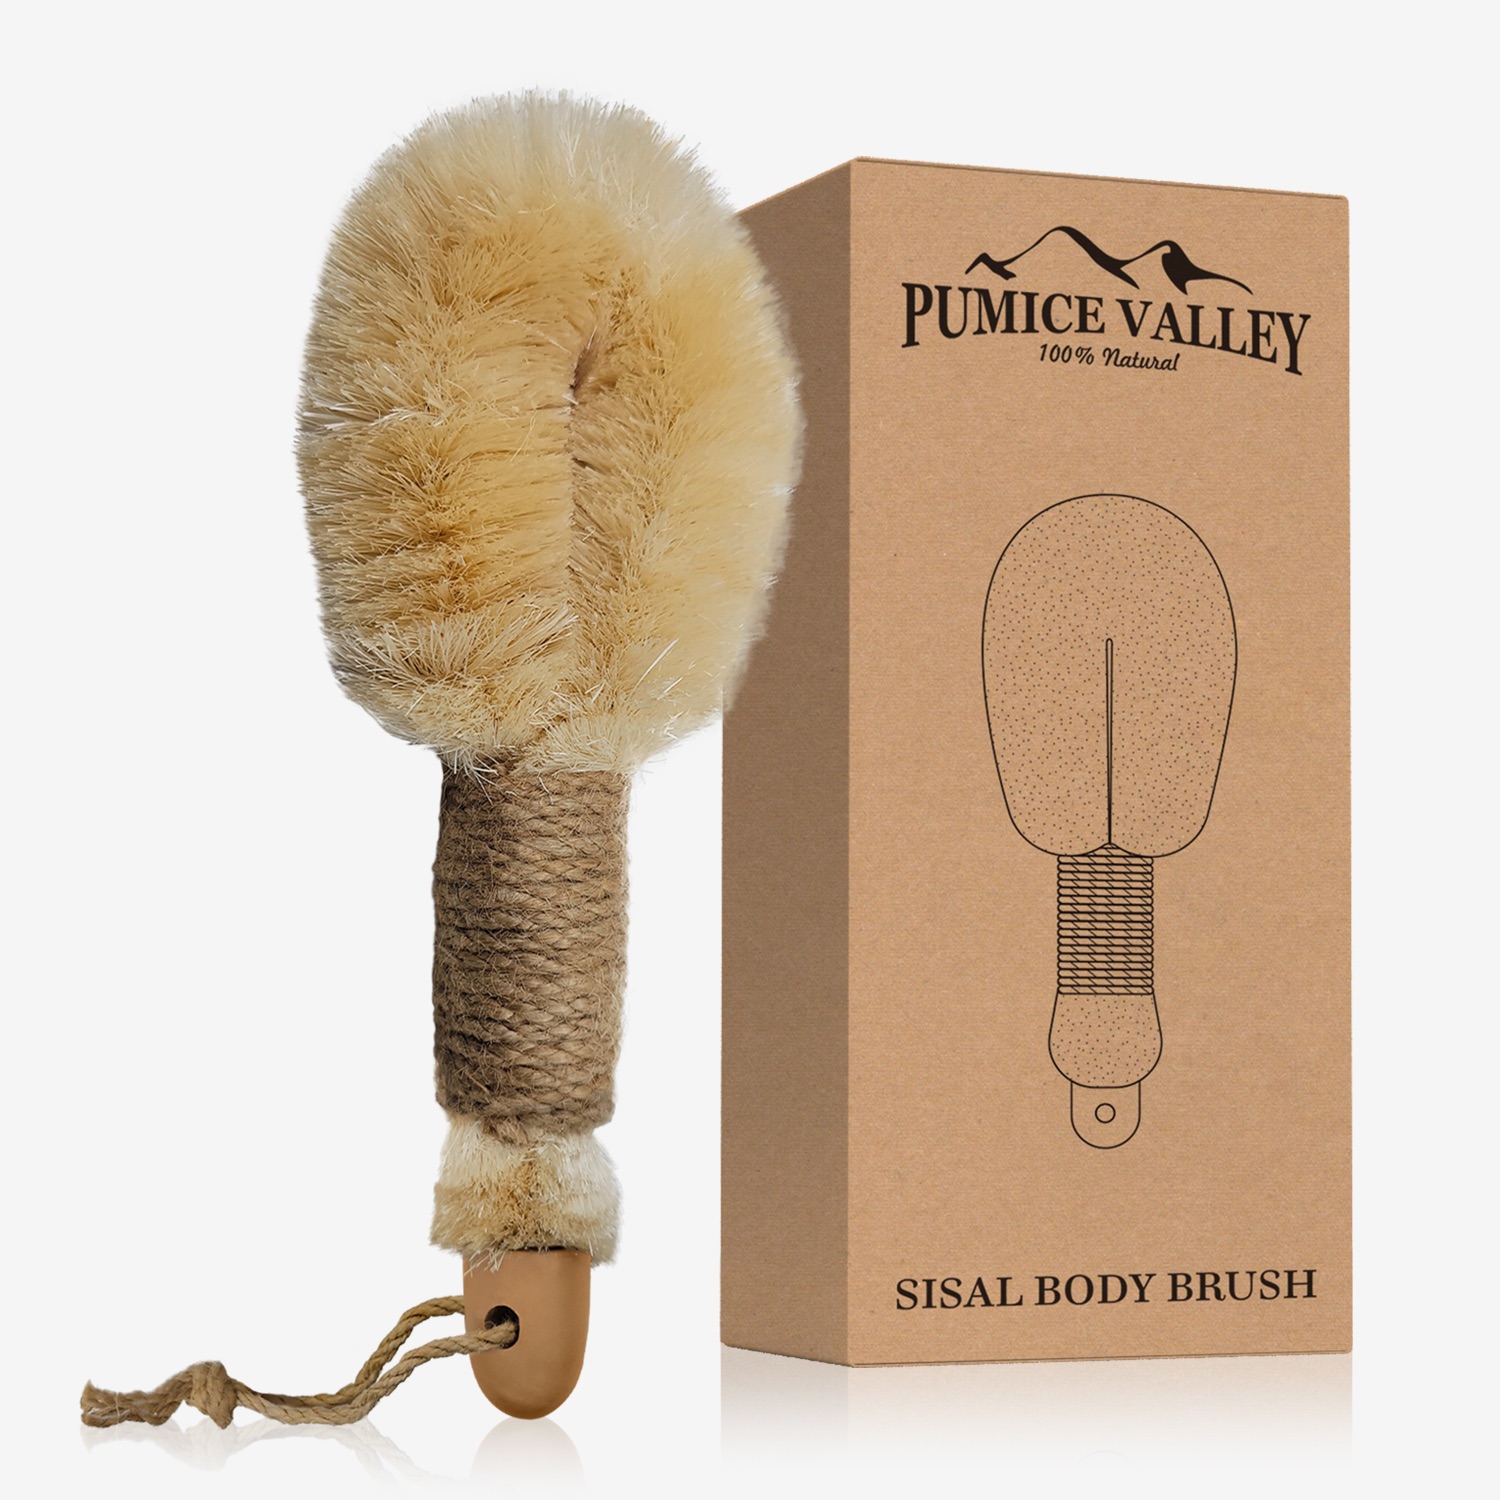 Sisal Dry Body Brush with Natural Bristle